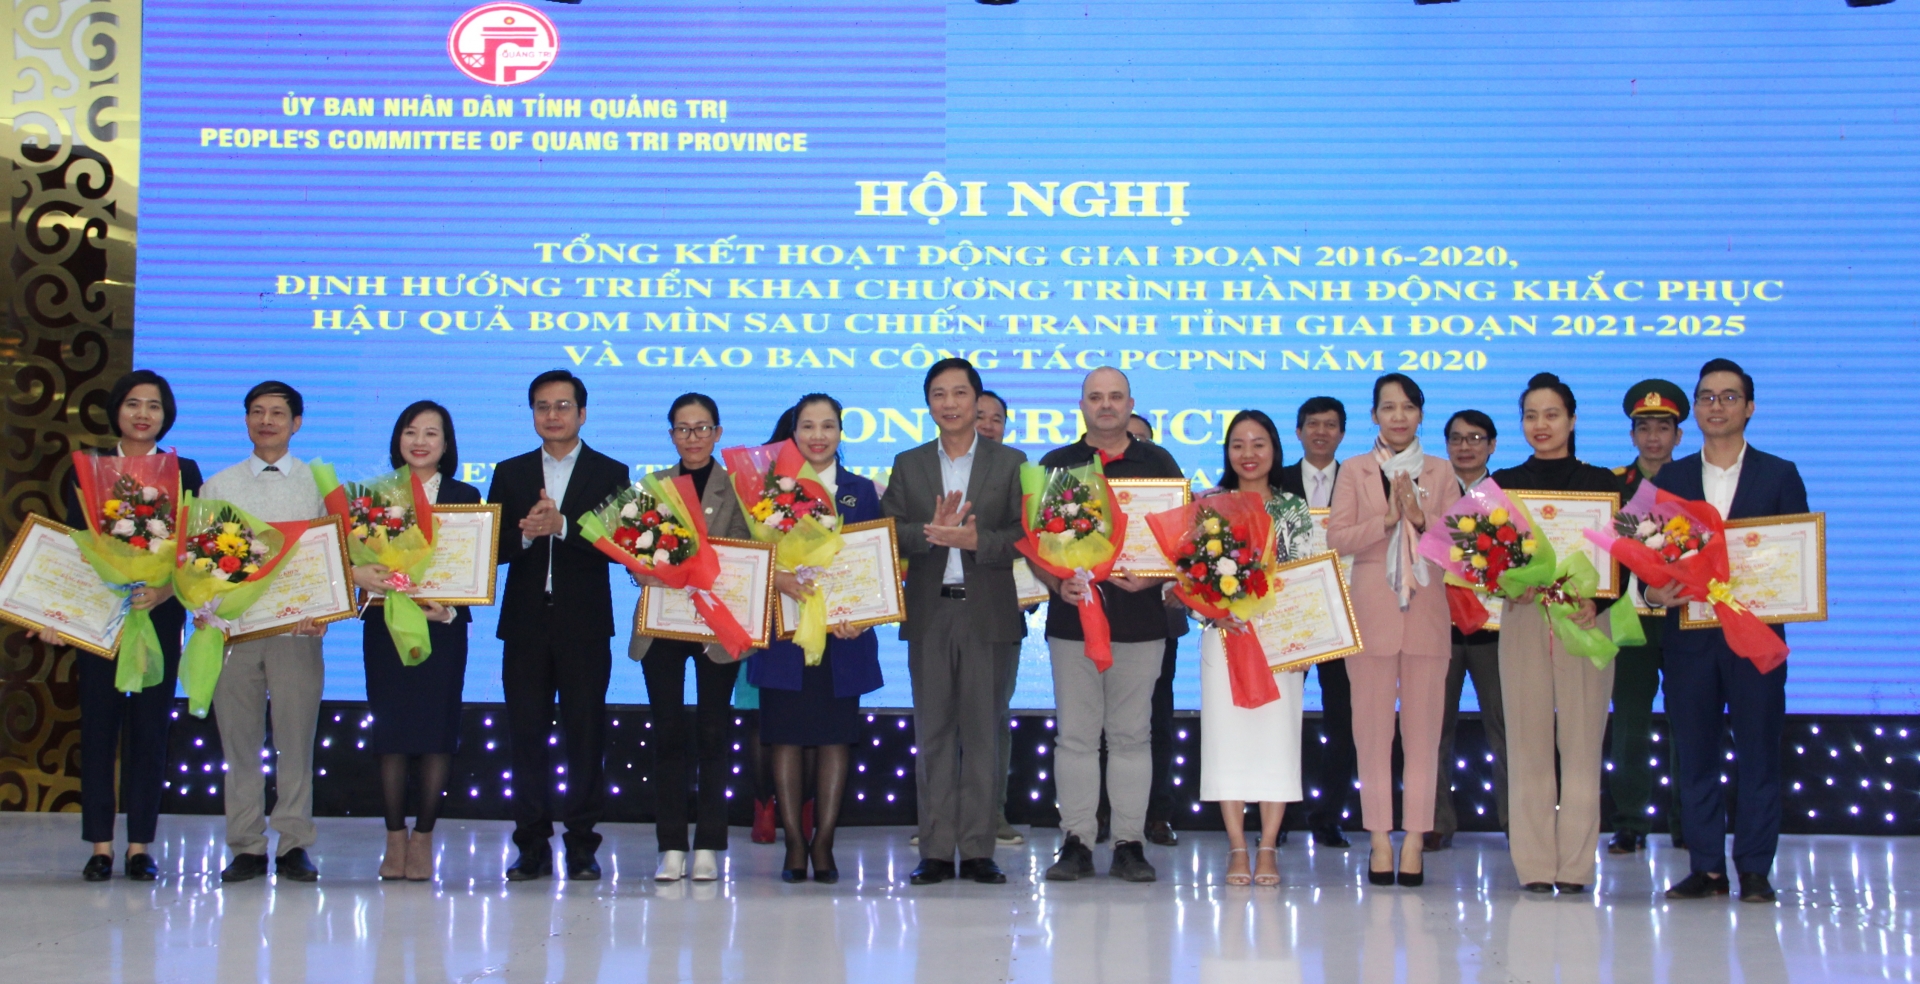 Quang tri thanks ngos for achievements' support to humanitarian mine clearance